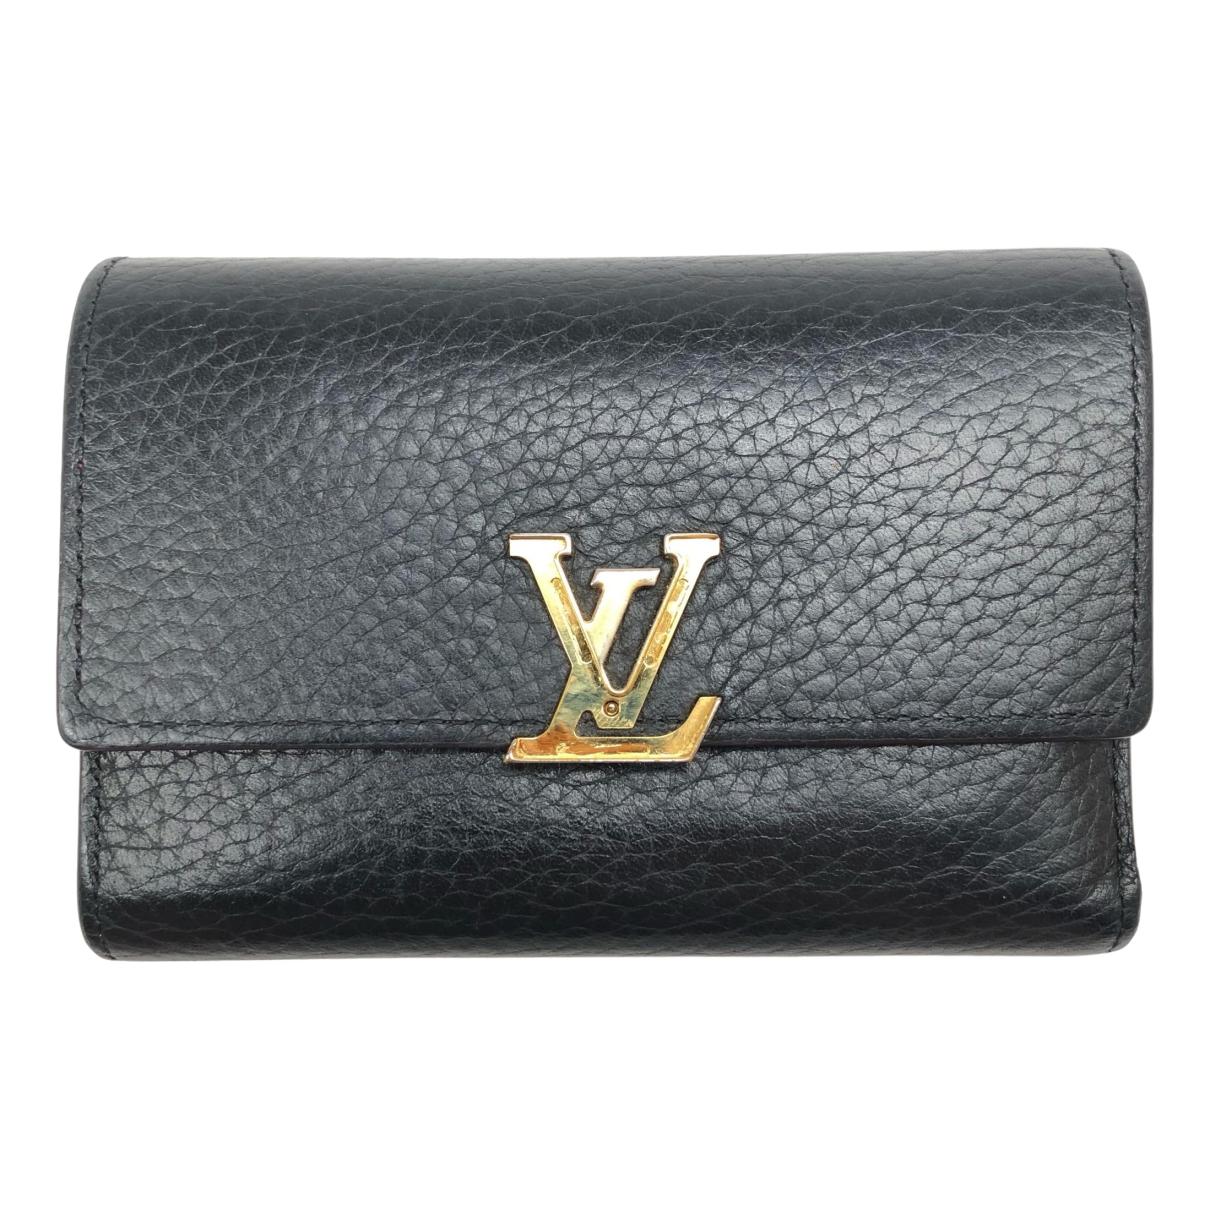 LOUIS VUITTON Portefeuille Capucines Compact from JAPAN